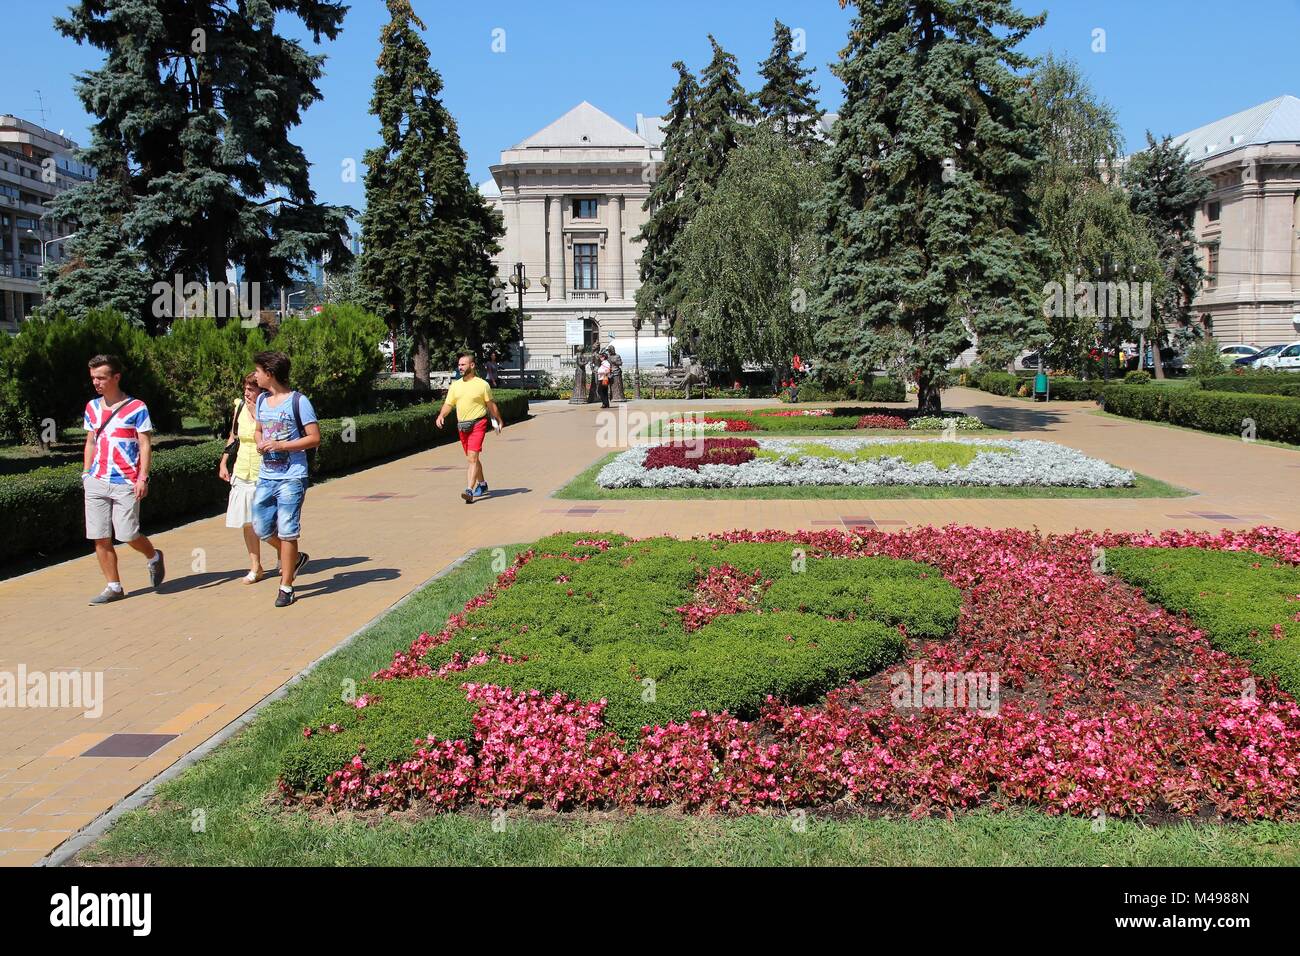 PLOIESTI, ROMANIA - AUGUST 20: People visit city park on August 20, 2012 in Ploiesti, Romania. Ploiesti is the 9th largest city in Romania and exists  Stock Photo